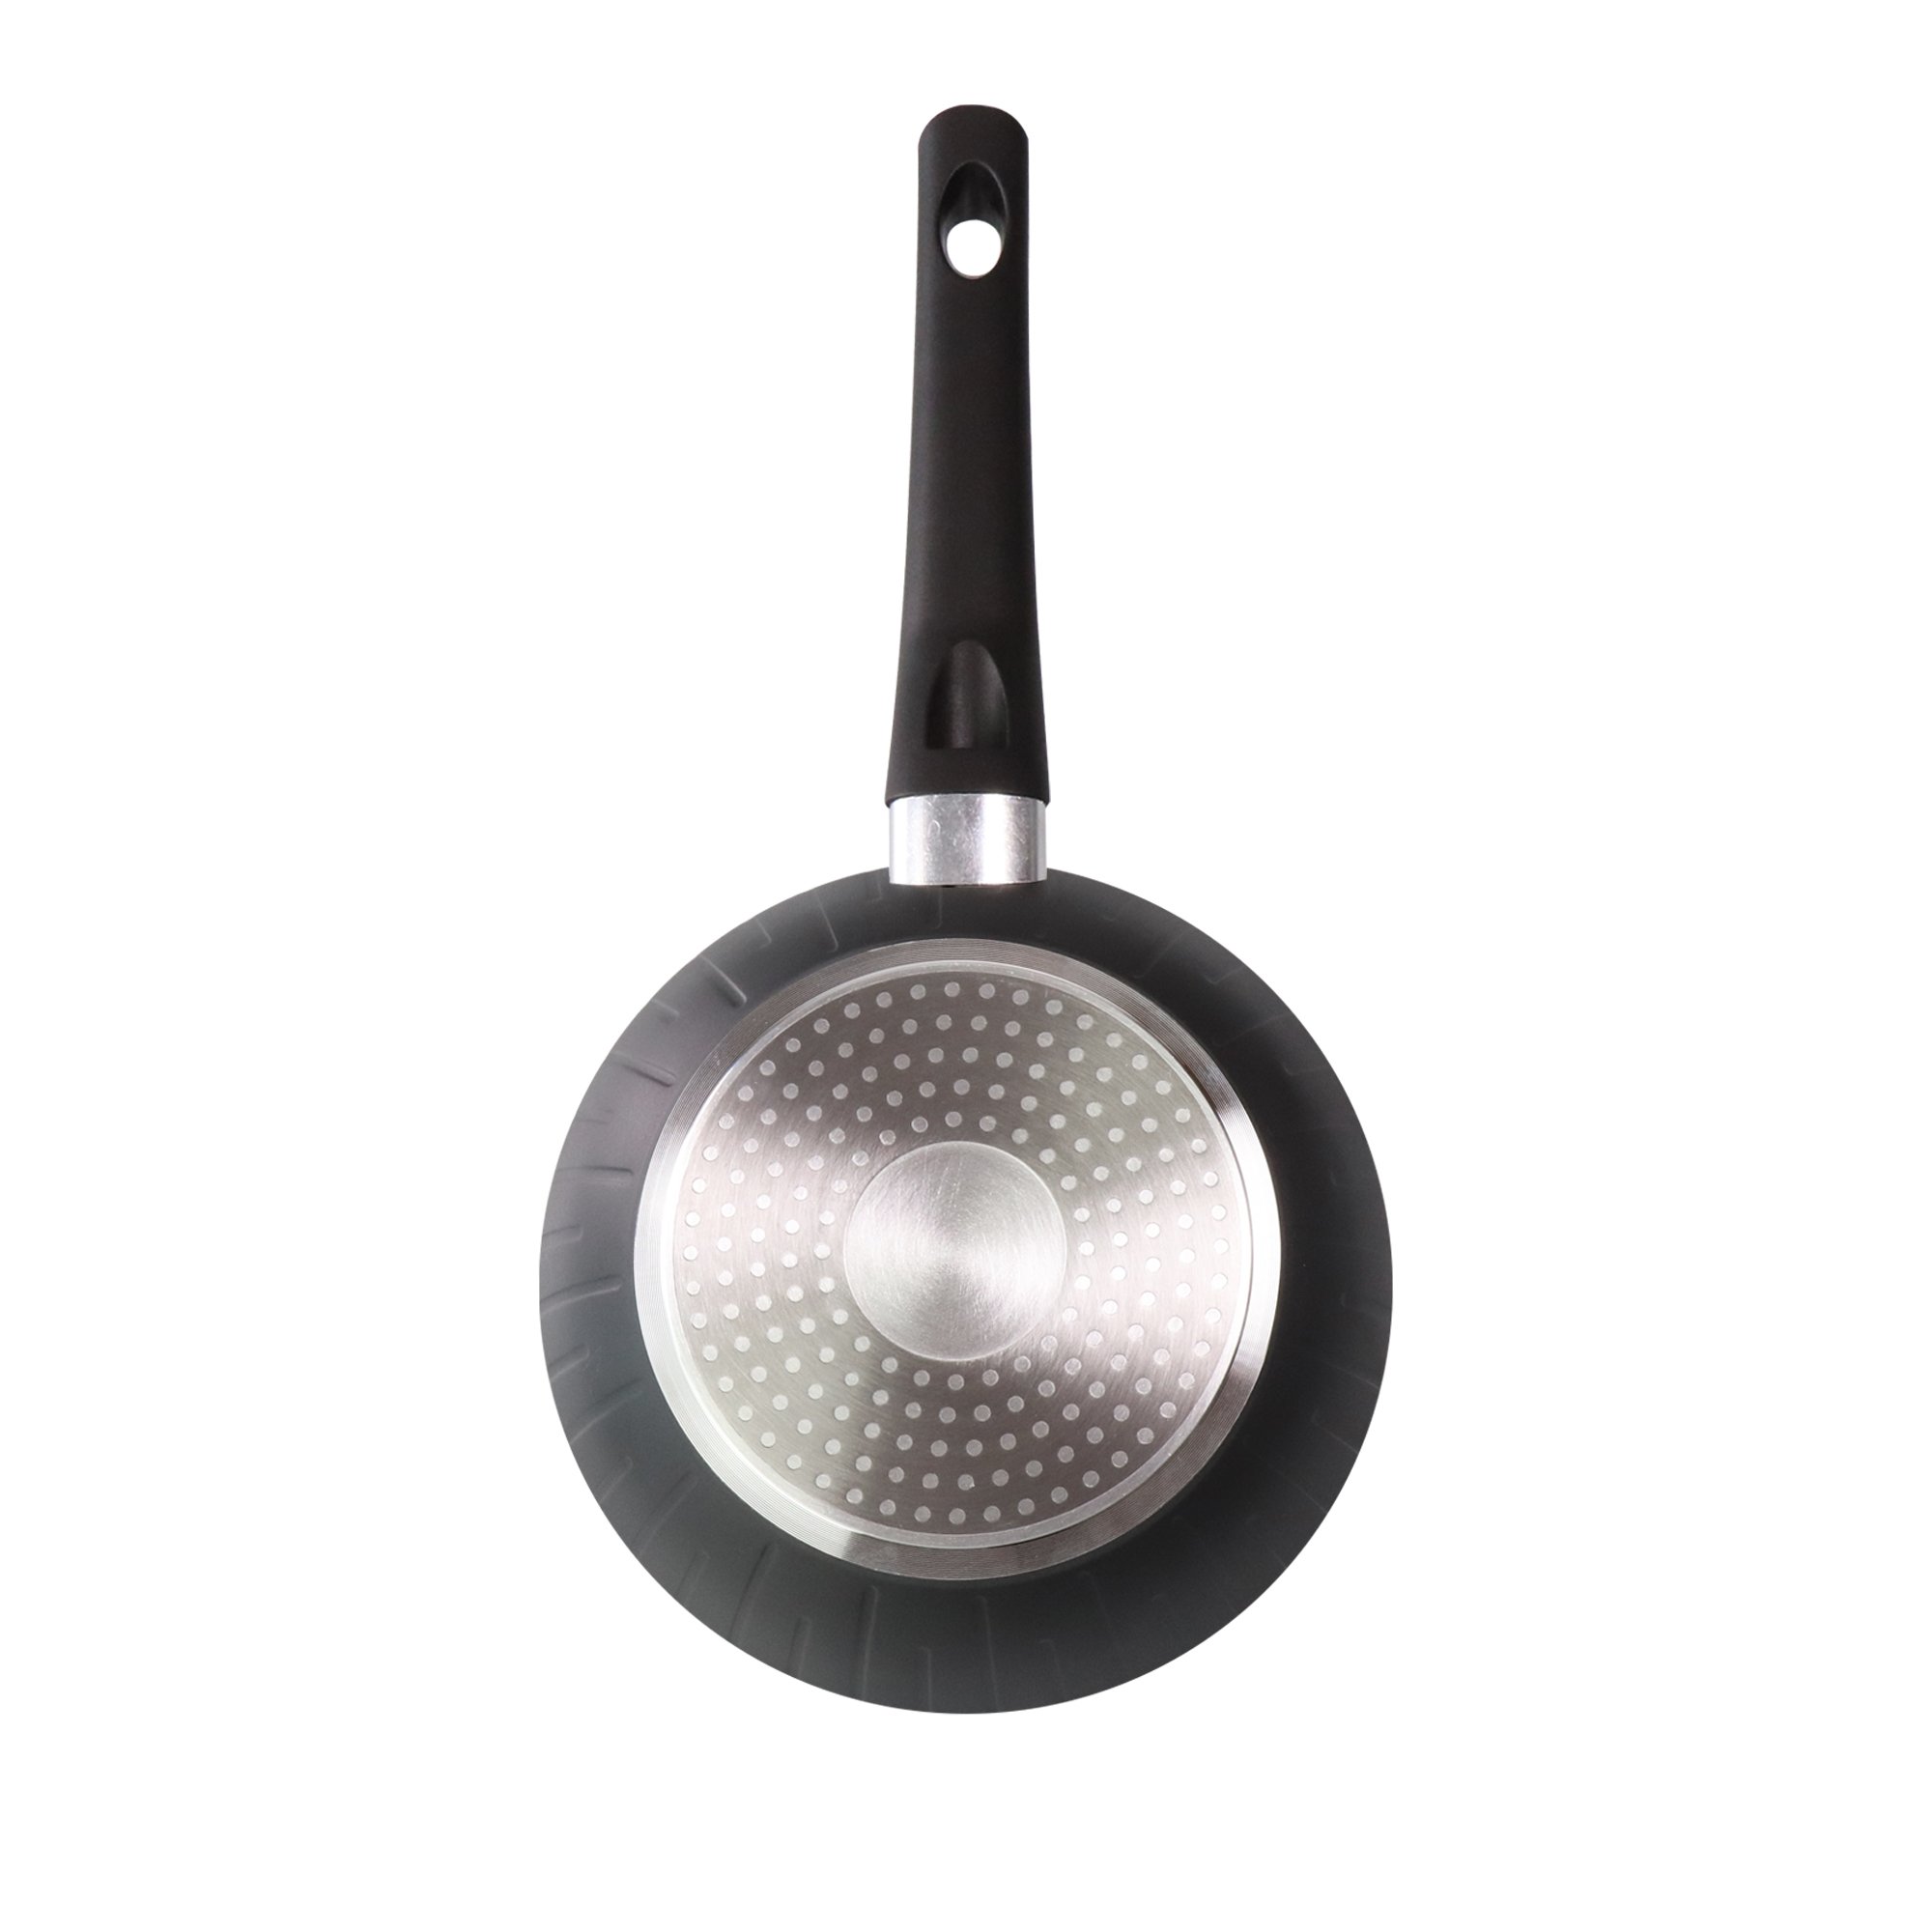 STONELINE® frying pan 20 cm with stripe design, induction and non-stick coated pan